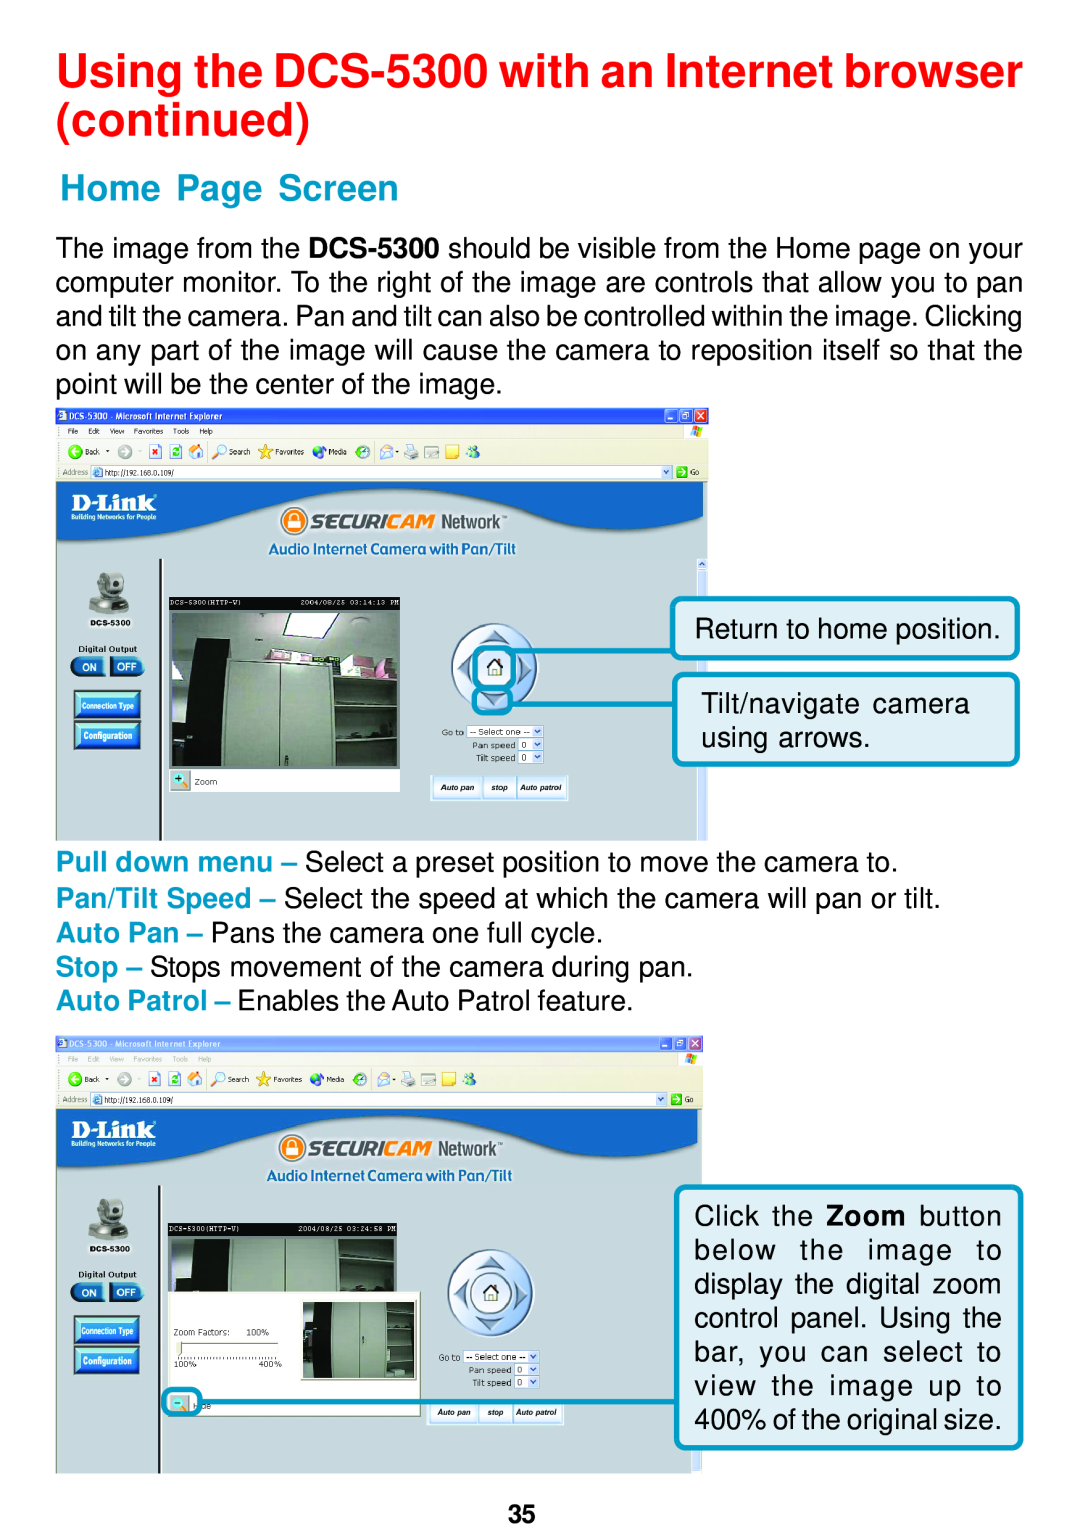 D-Link manual Using the DCS-5300 with an Internet browser continued, Home Page Screen 